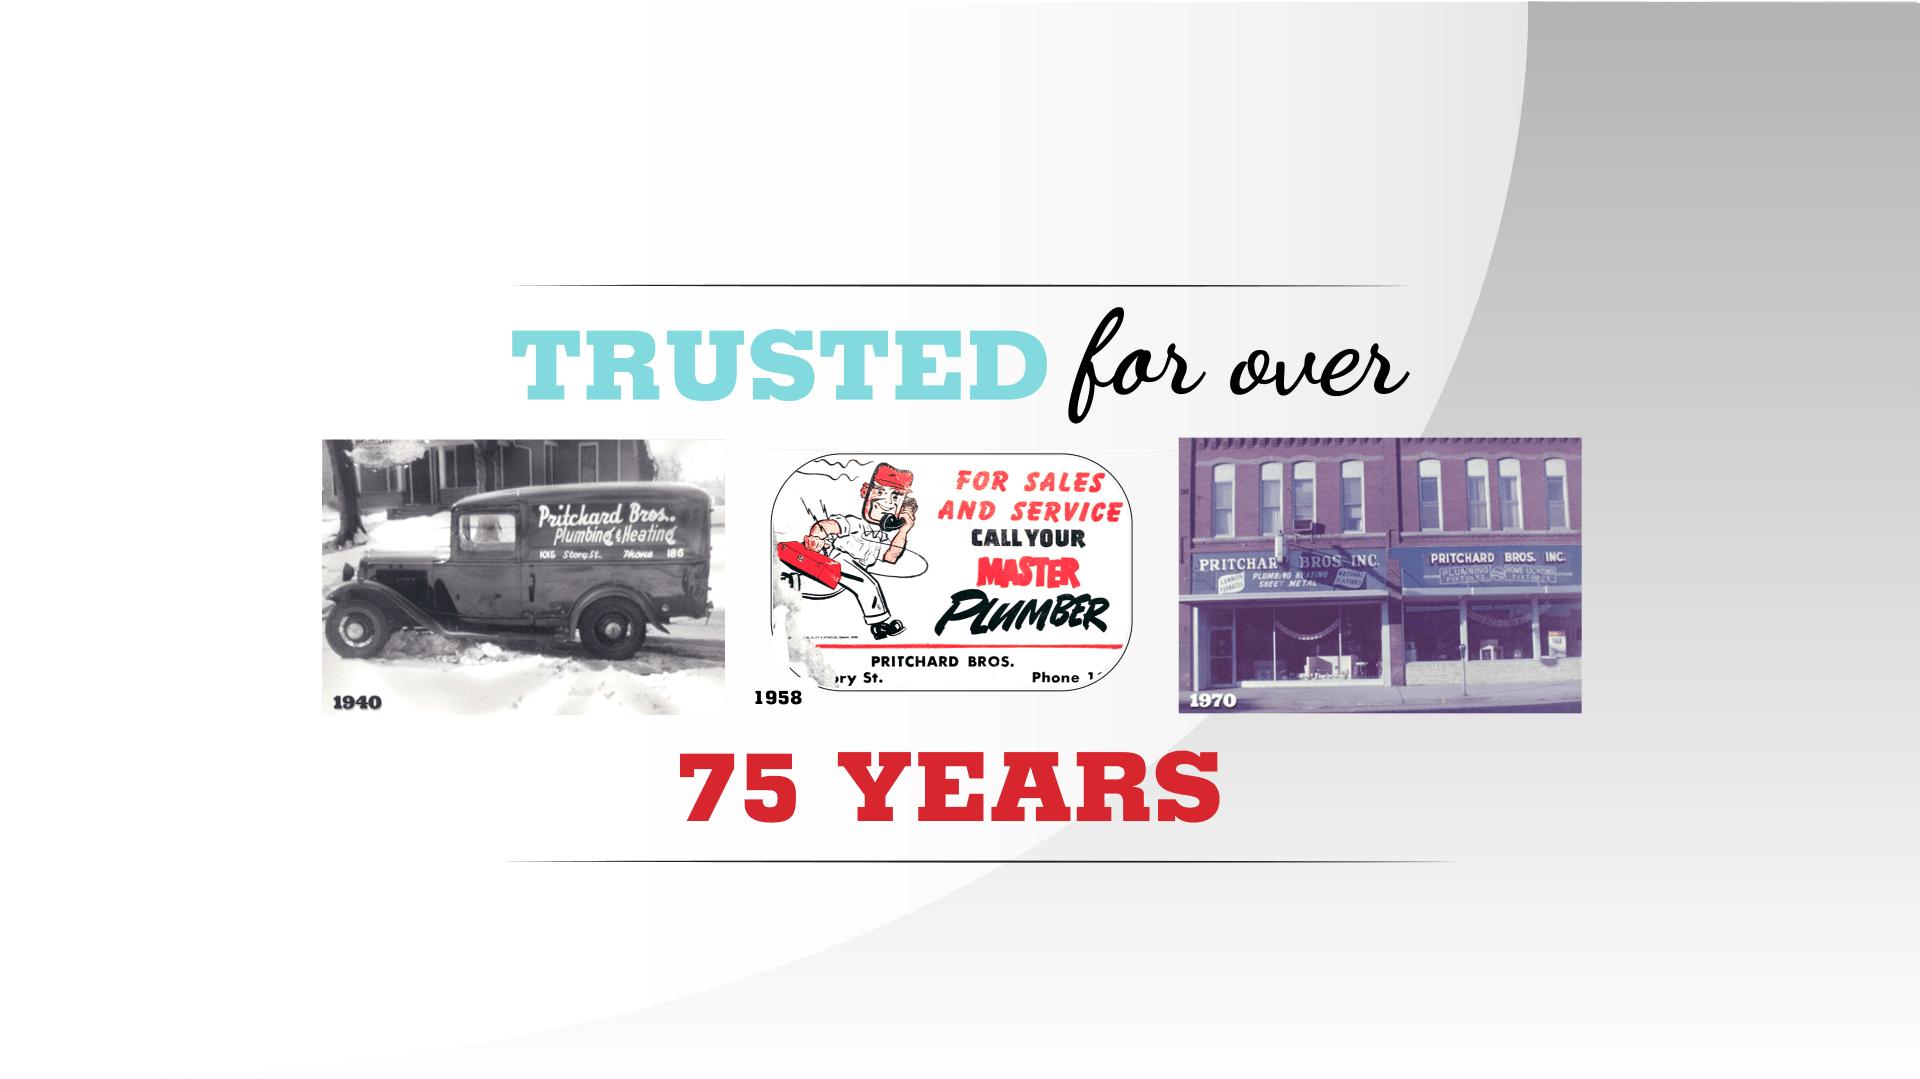 Trusted for 75 years